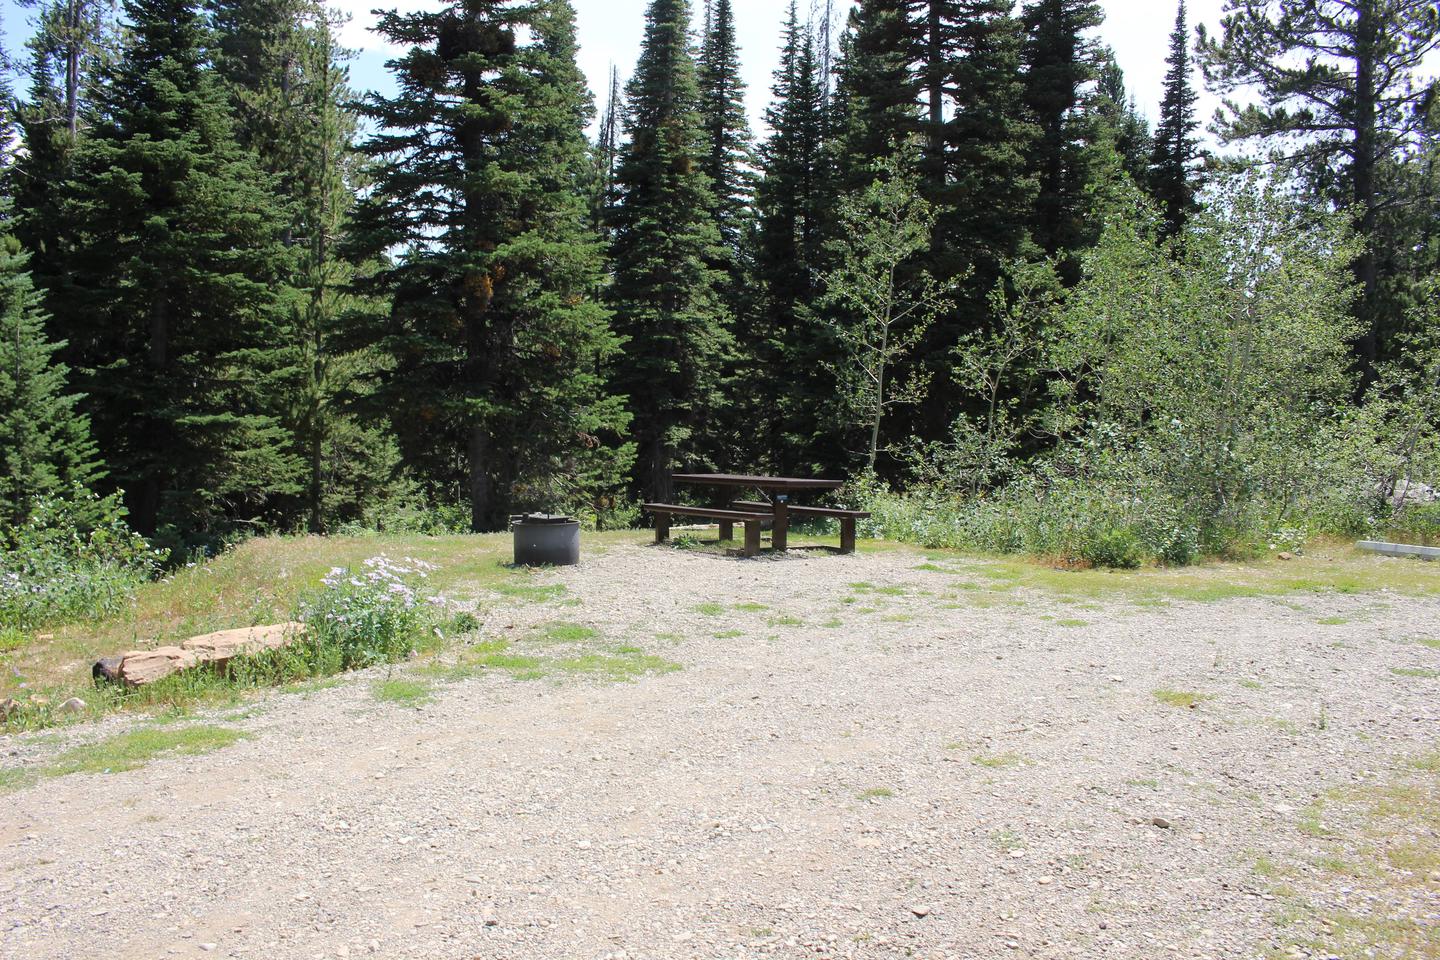 Site 2Site 2 Fire Pit And Picnic Table